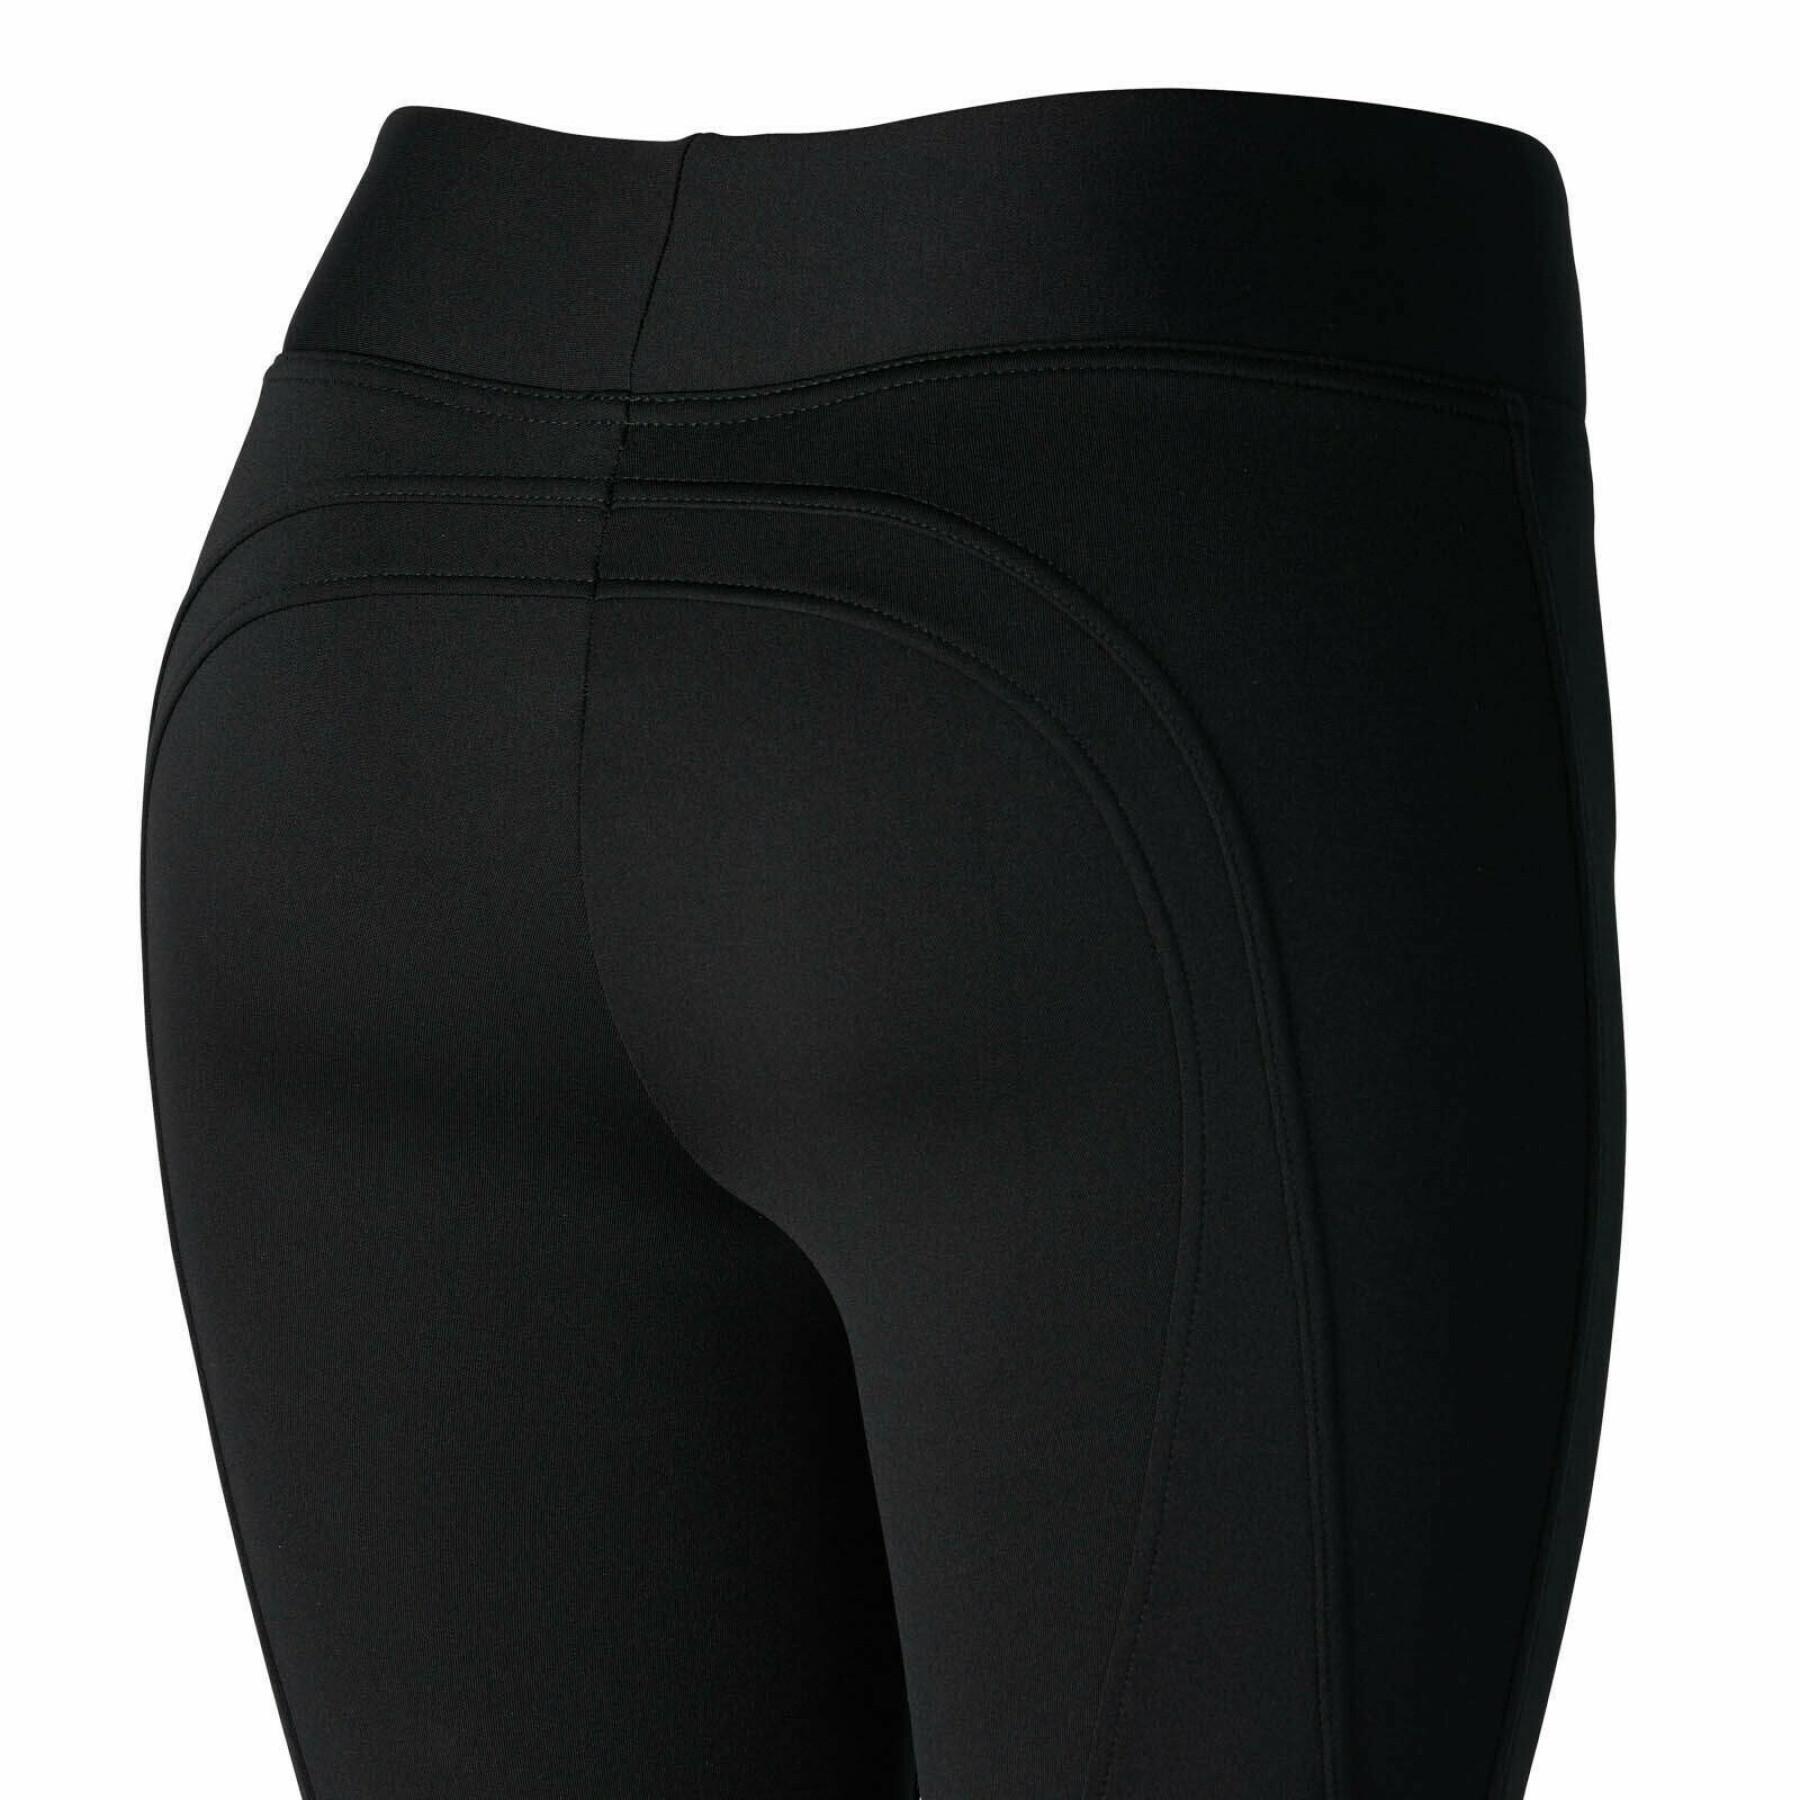 Leggins thermal Mid Grip mujer Horze Active